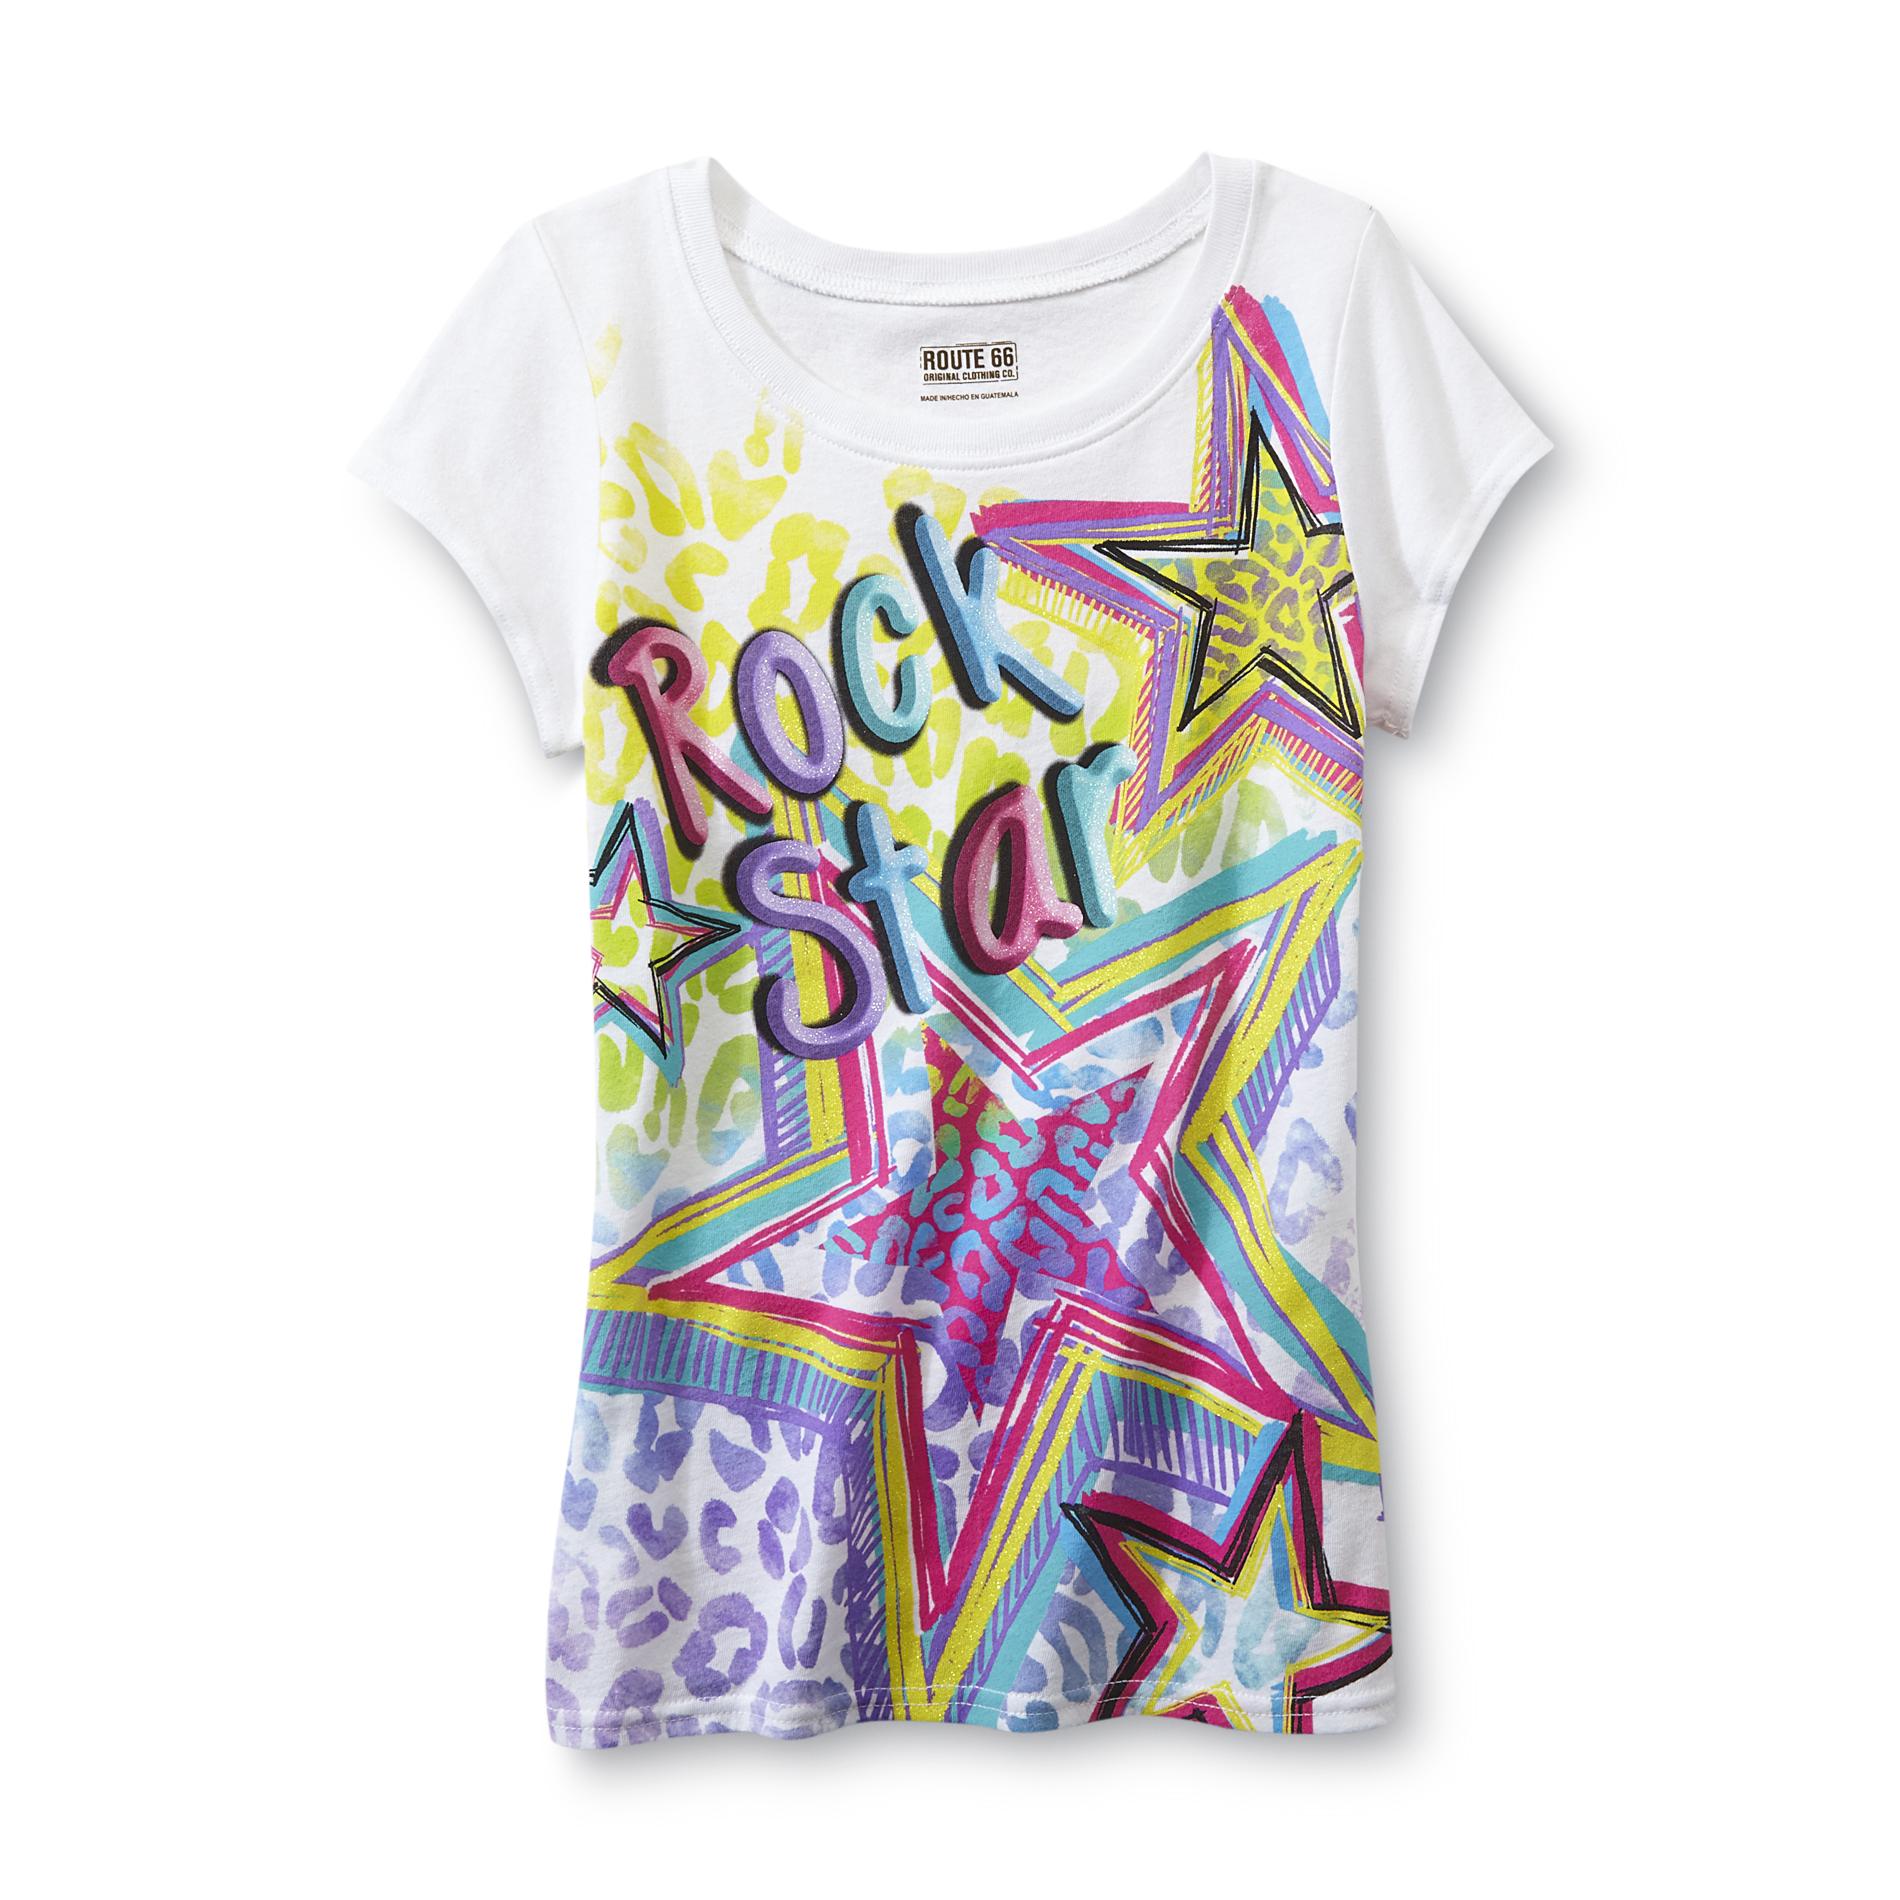 Route 66 Girl's Graphic T-Shirt - Rock Star